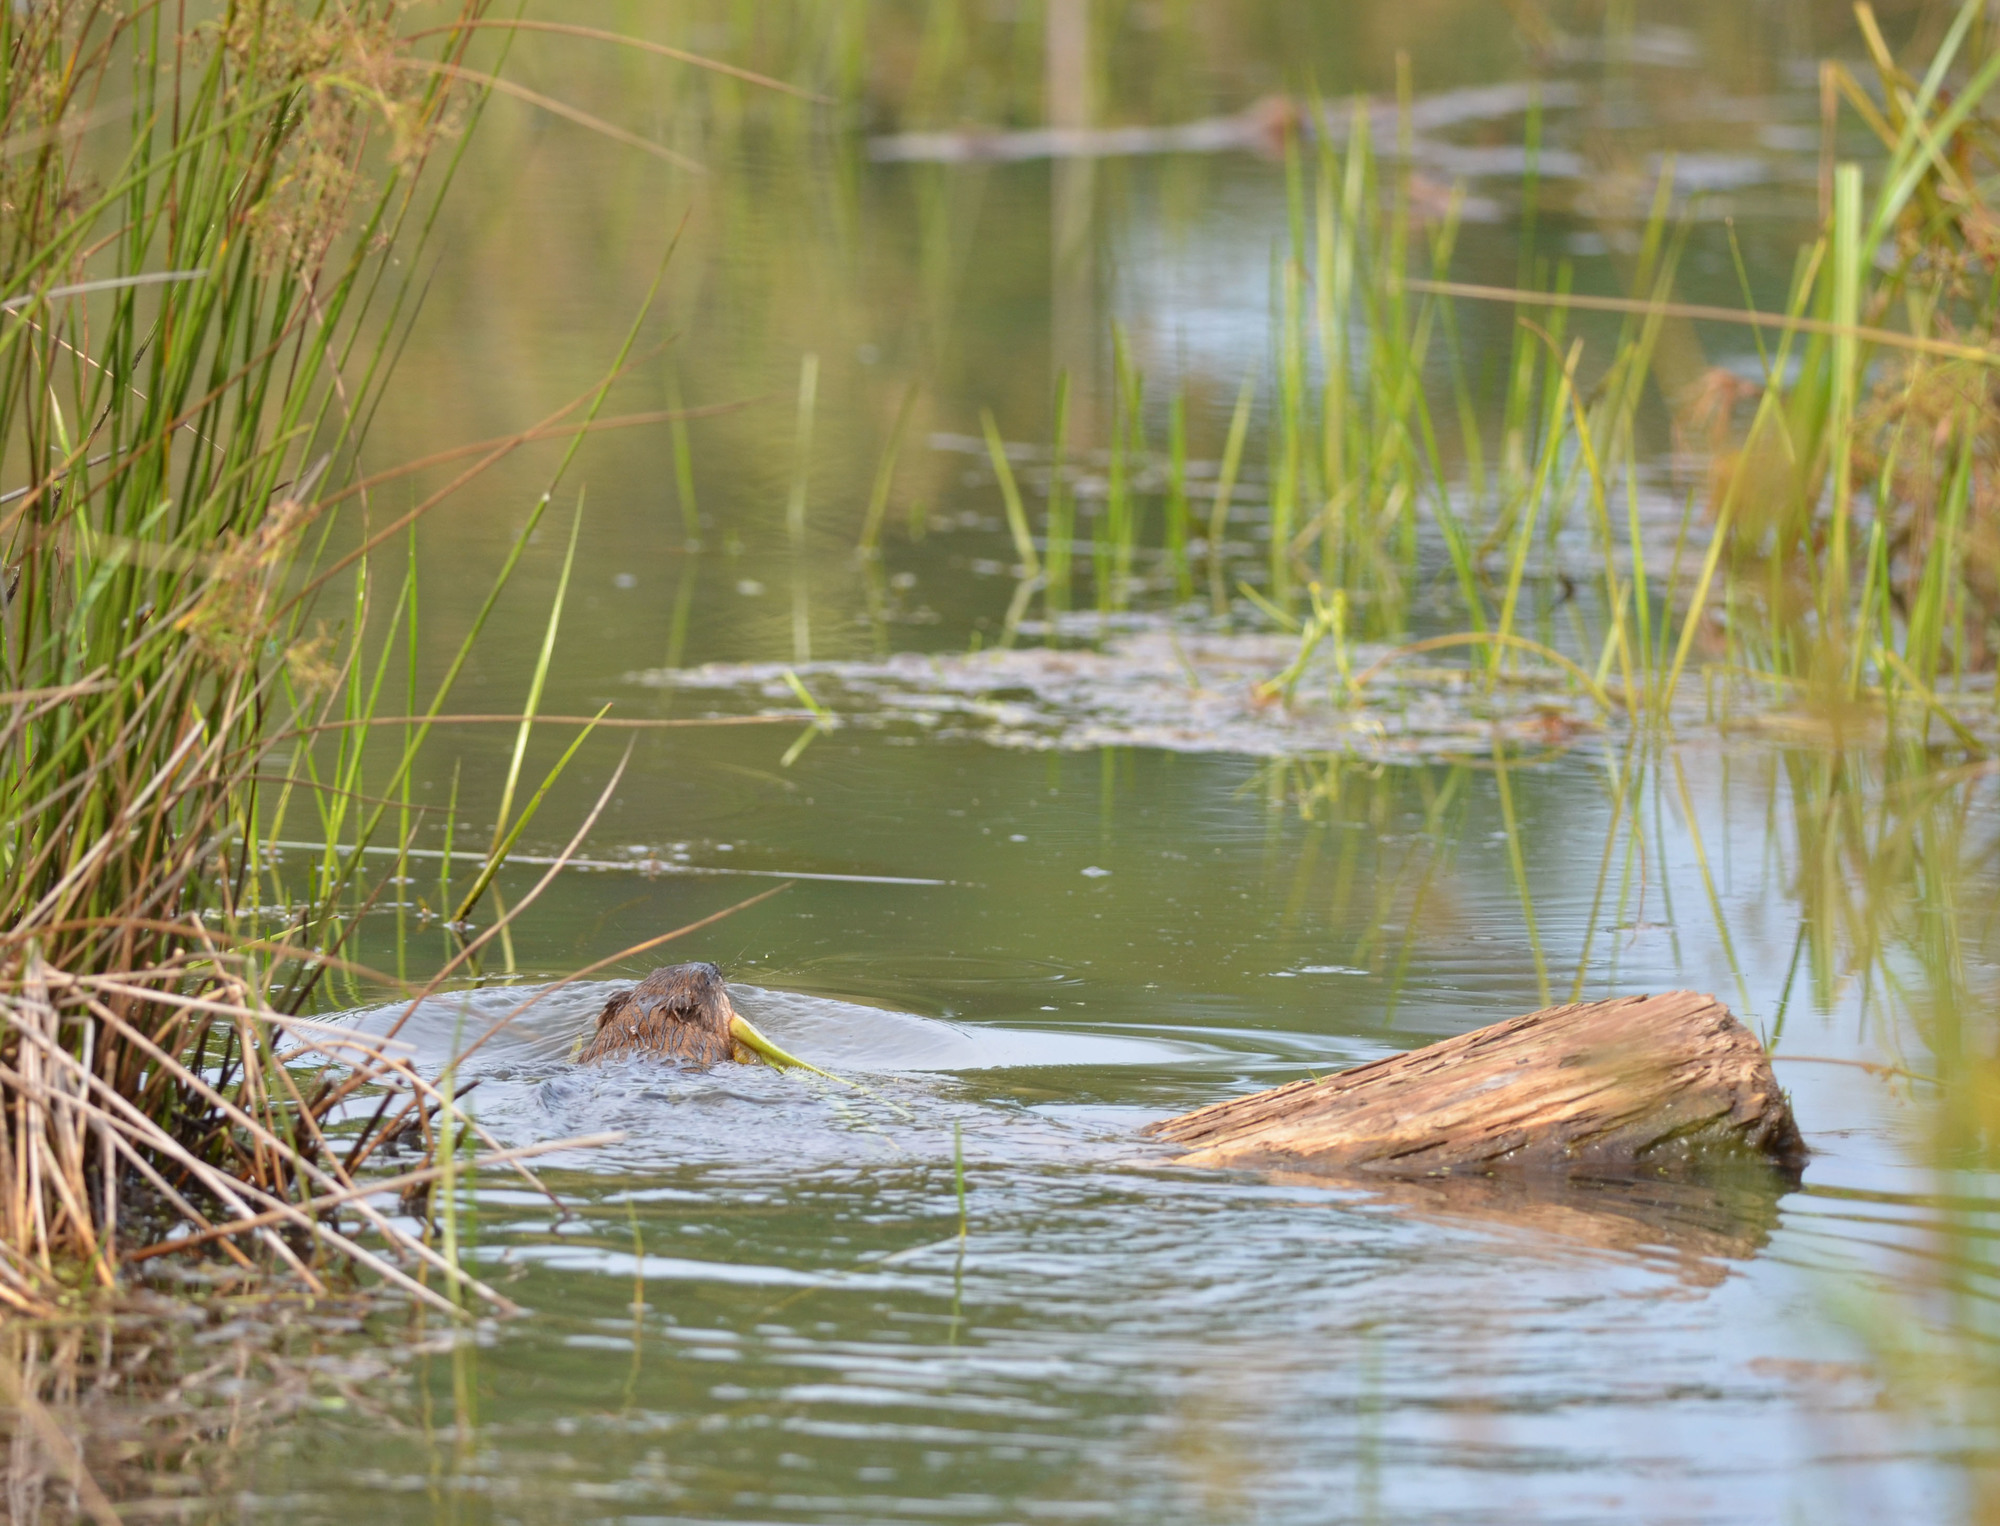 A muskrat drags a cattail reed over a log. Mink, otters, muskrats and beavers can be found feeding and denning along river shorelines.